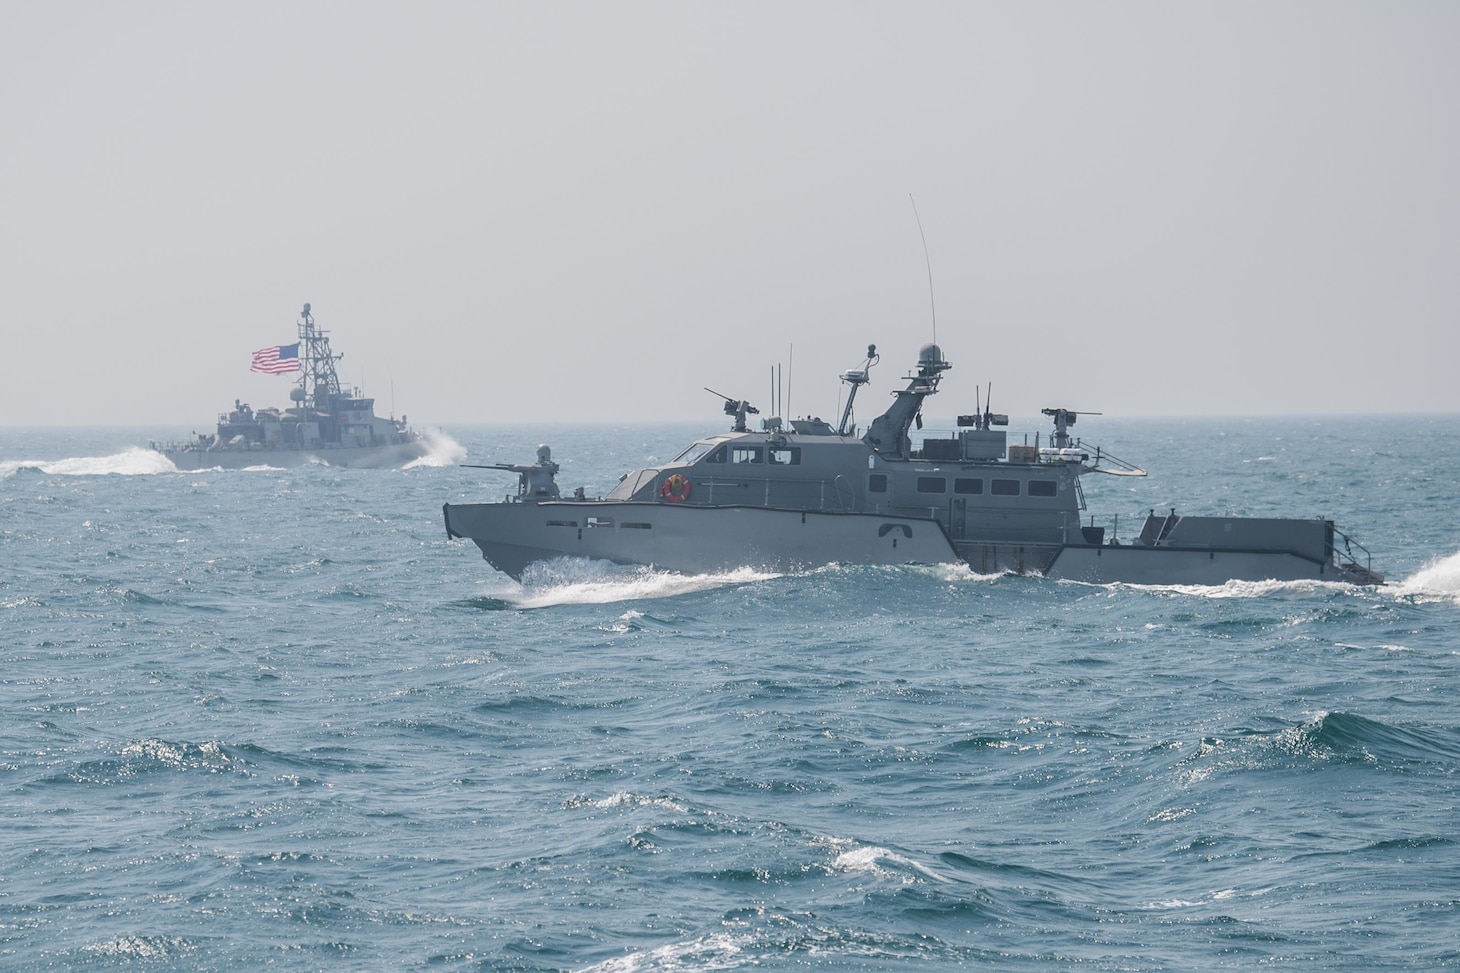 210305-N-DS741-1547 ARABIAN GULF (March 5, 2021) – A Mark VI patrol boat, right, attached to Commander, Task Force (CTF) 56, and patrol coastal ship USS Typhoon (PC 5), conduct defensive maneuvering techniques during Coalition Task Force (CTF) Sentinel led training in the Arabian Gulf, March 5. CTF Sentinel, the operational arm of the International Maritime Security Construct, is a multinational maritime effort to promote freedom of navigation and reassure merchant shipping by deterring and exposing state-sponsored malign activity that threatens security of the maritime commons in the Arabian Gulf, Strait of Hormuz, Gulf of Oman, Gulf of Aden, Bab el-Mandeb Strait and Southern Red Sea. (U.S. Navy photo by Mass Communication Specialist 3rd Class Zachary Pearson/Released)